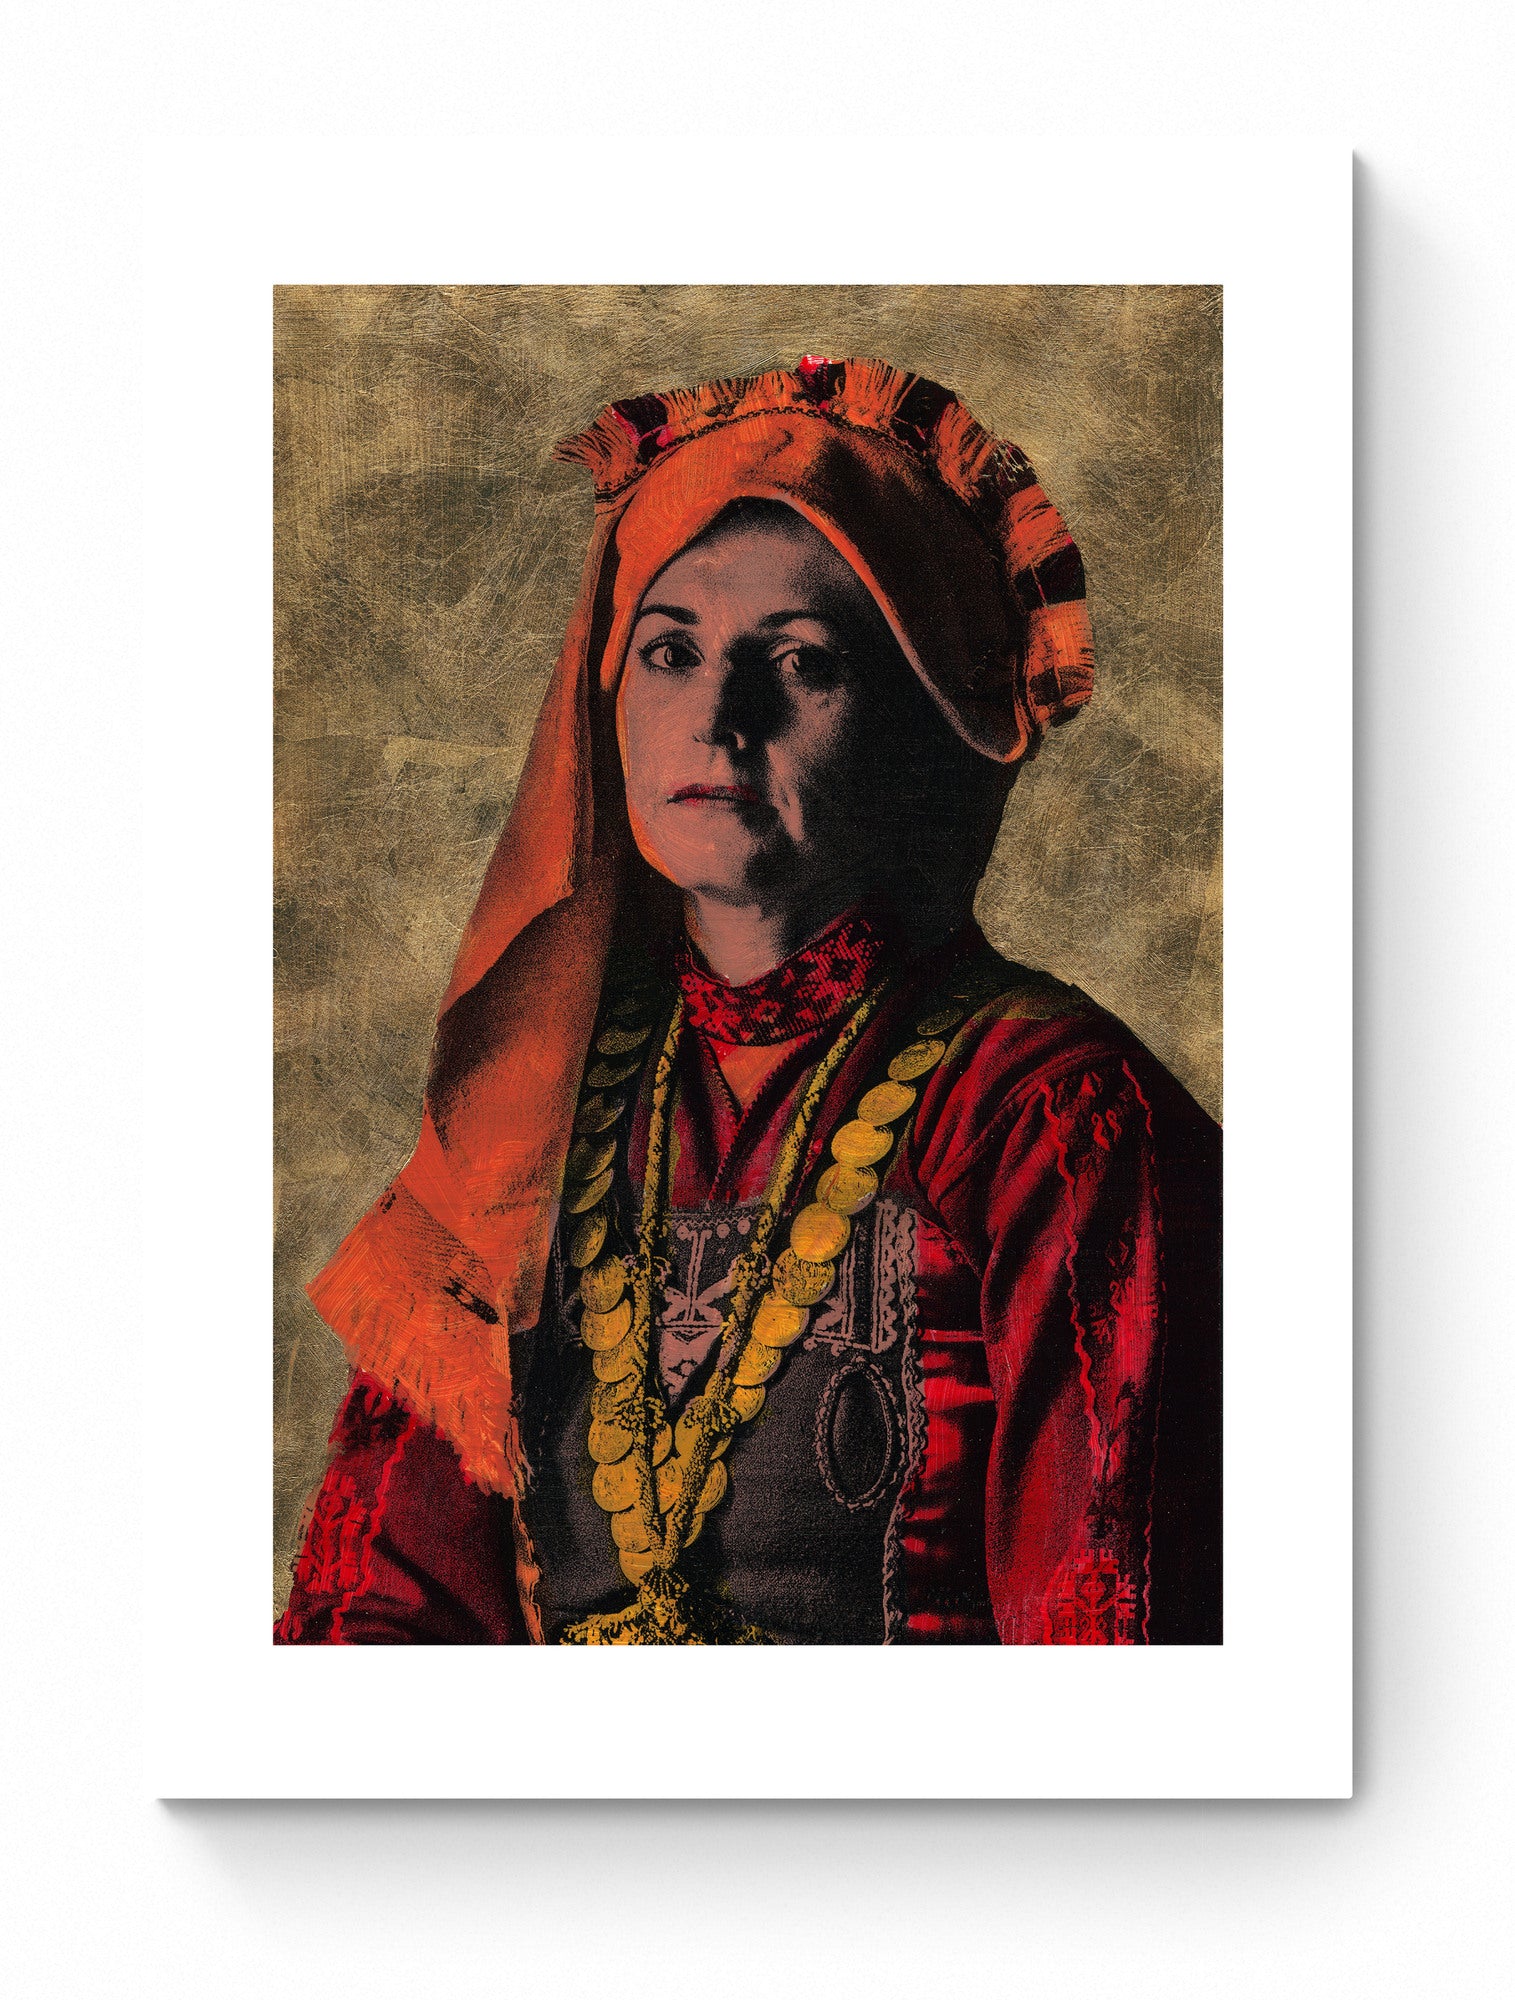 Painting Pop Art Wall Art from Greece | Golden Mani Costume from Evros, Thrace, by George Tatakis - poster